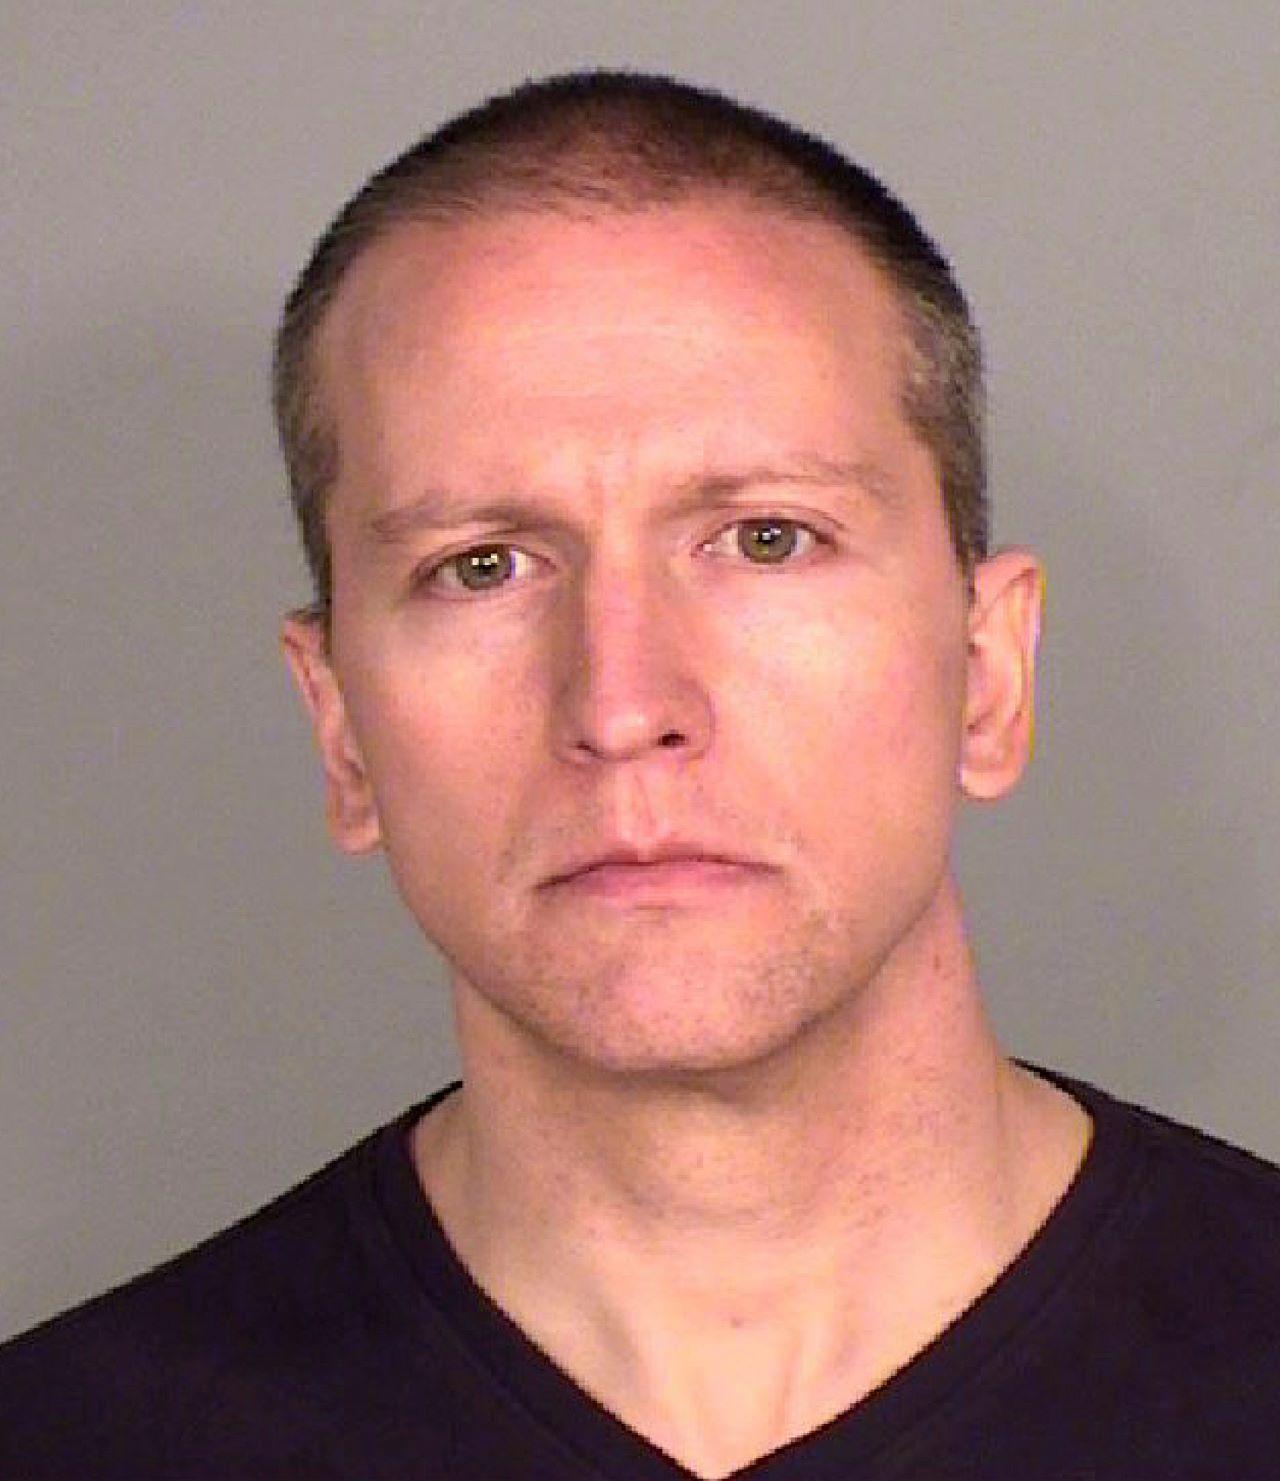 This file photo provided by the Ramsey County, Minneapolis, Sheriff's Office shows former Minneapolis police officer Derek Chauvin, who was arrested on May 29, 2020, in the death of George Floyd. Chauvin is charged with second-degree murder and manslaughter. Photo: AP